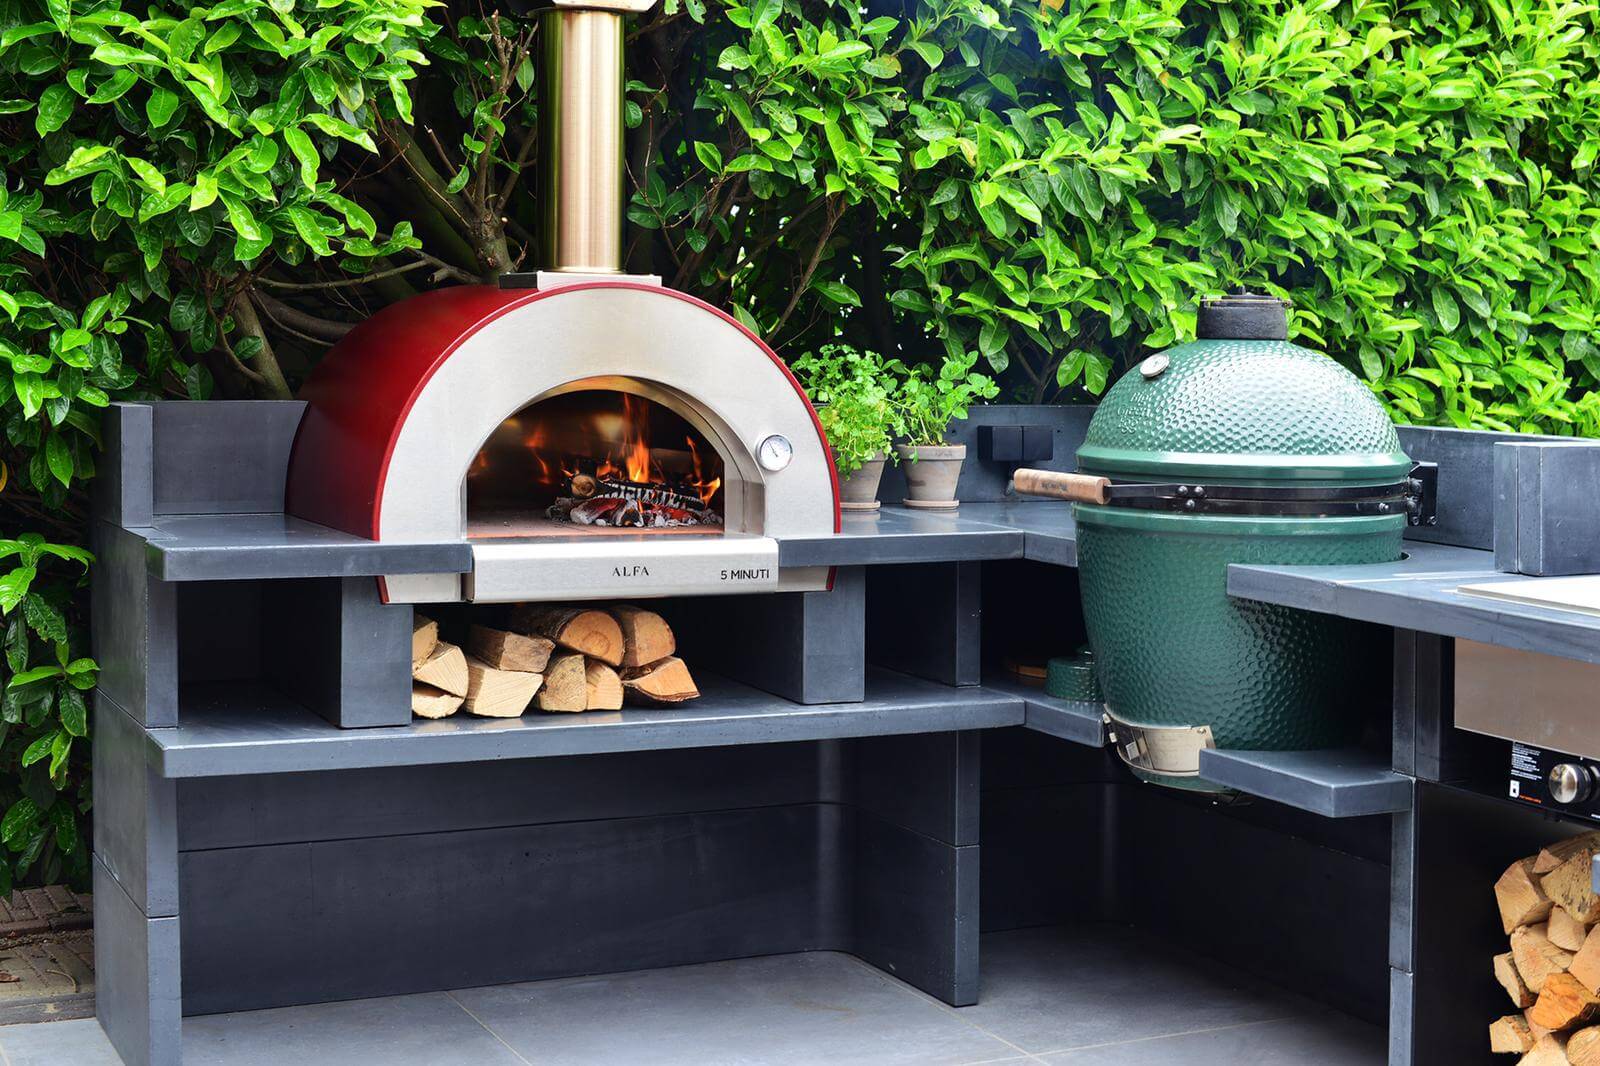 The key features that the best wood-fired pizza ovens should have.